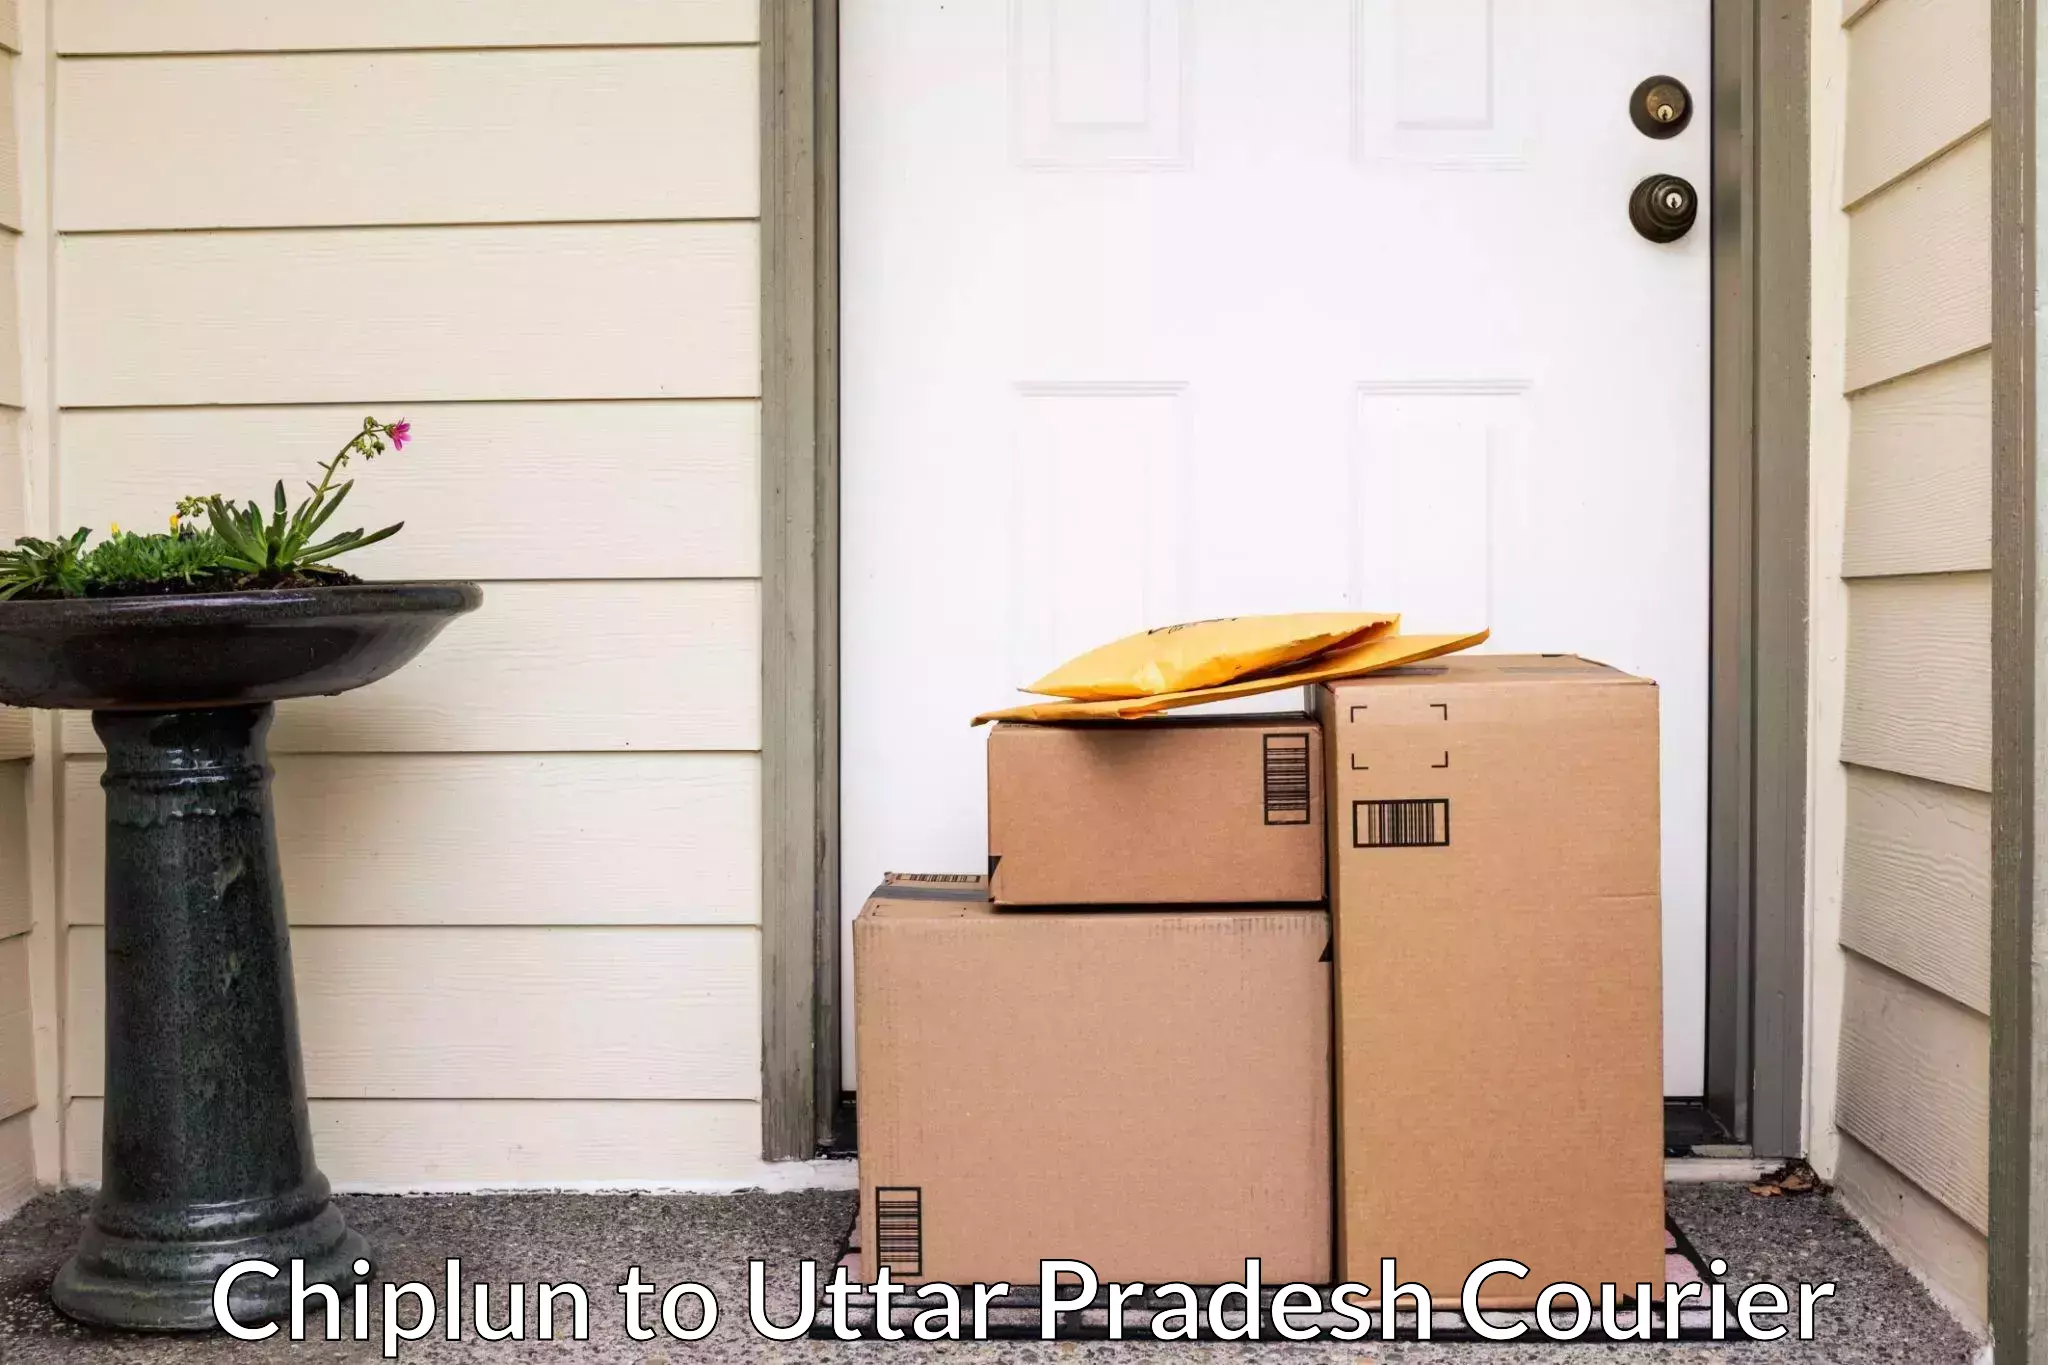 Trusted relocation experts Chiplun to Shahjahanpur